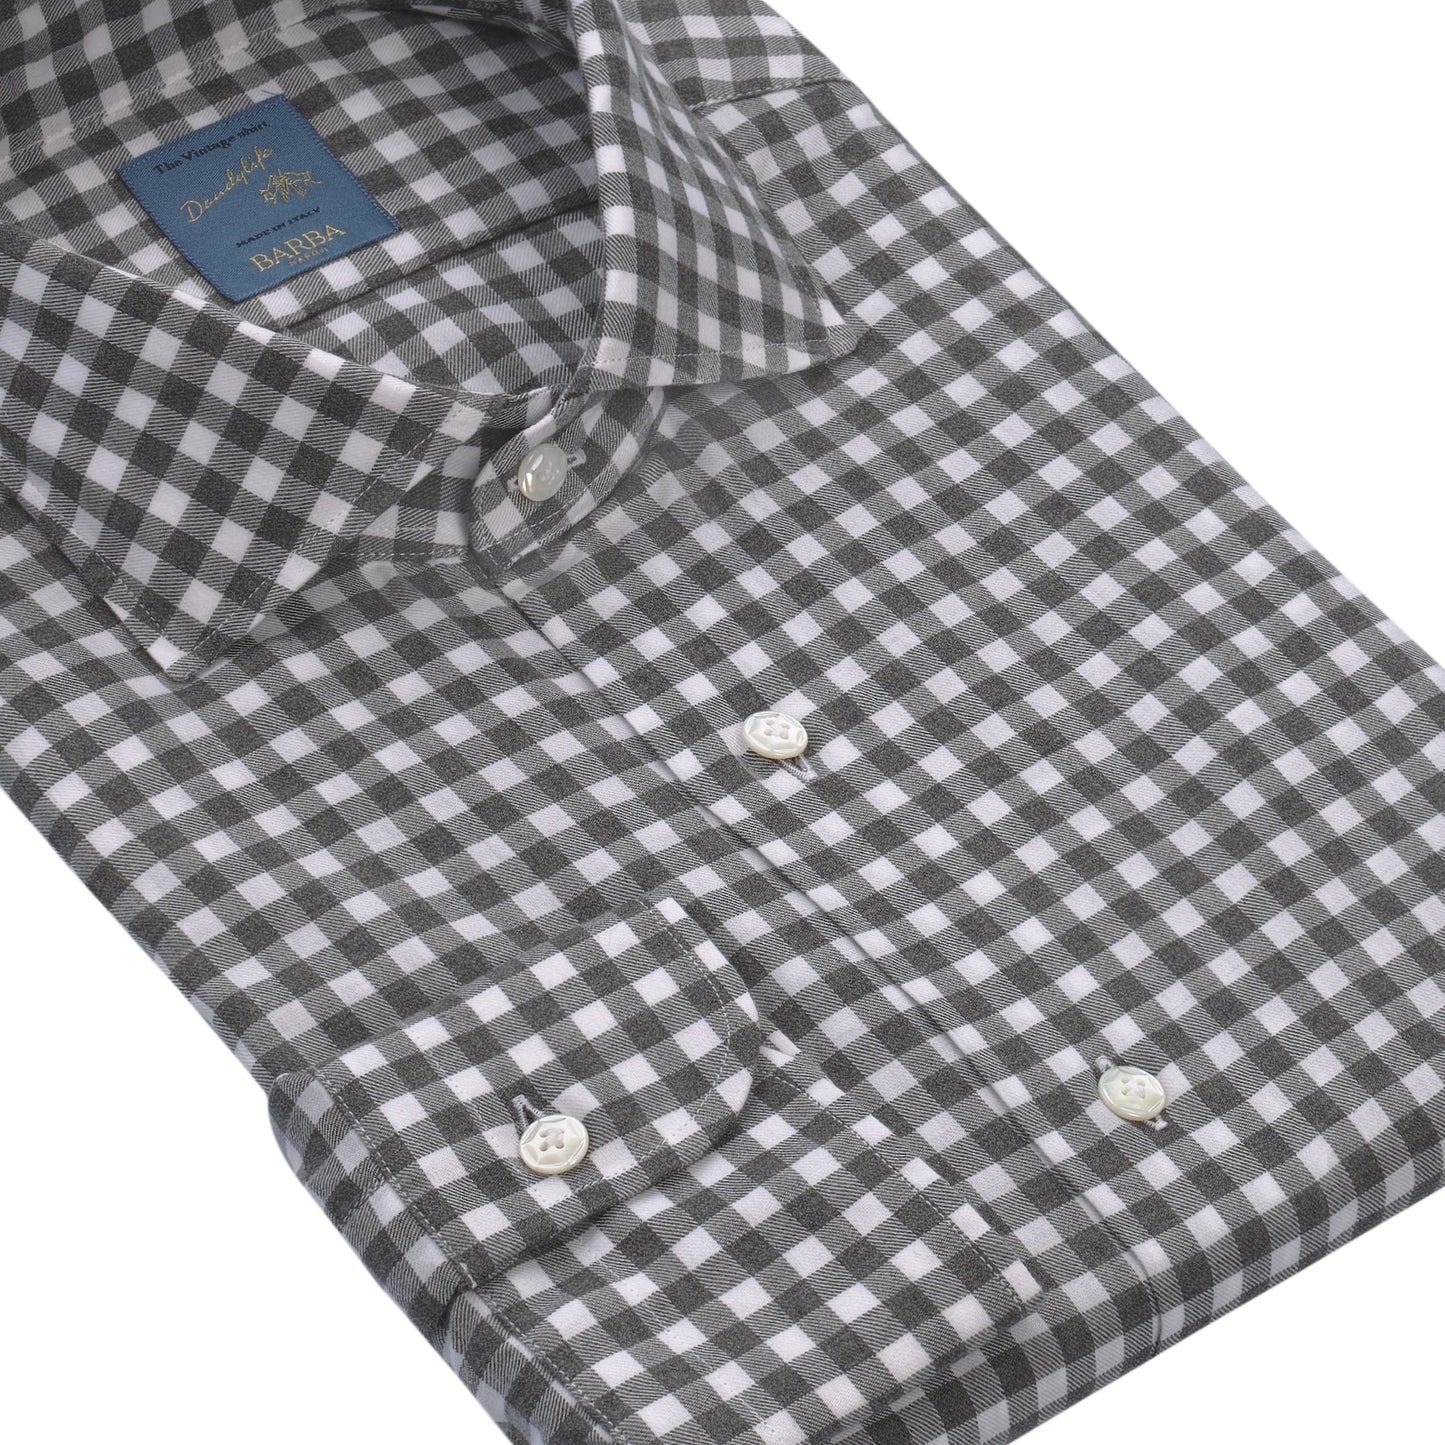 Barba Napoli "Dandy Life" Gingham - Check Cotton Shirt in Grey and White - SARTALE